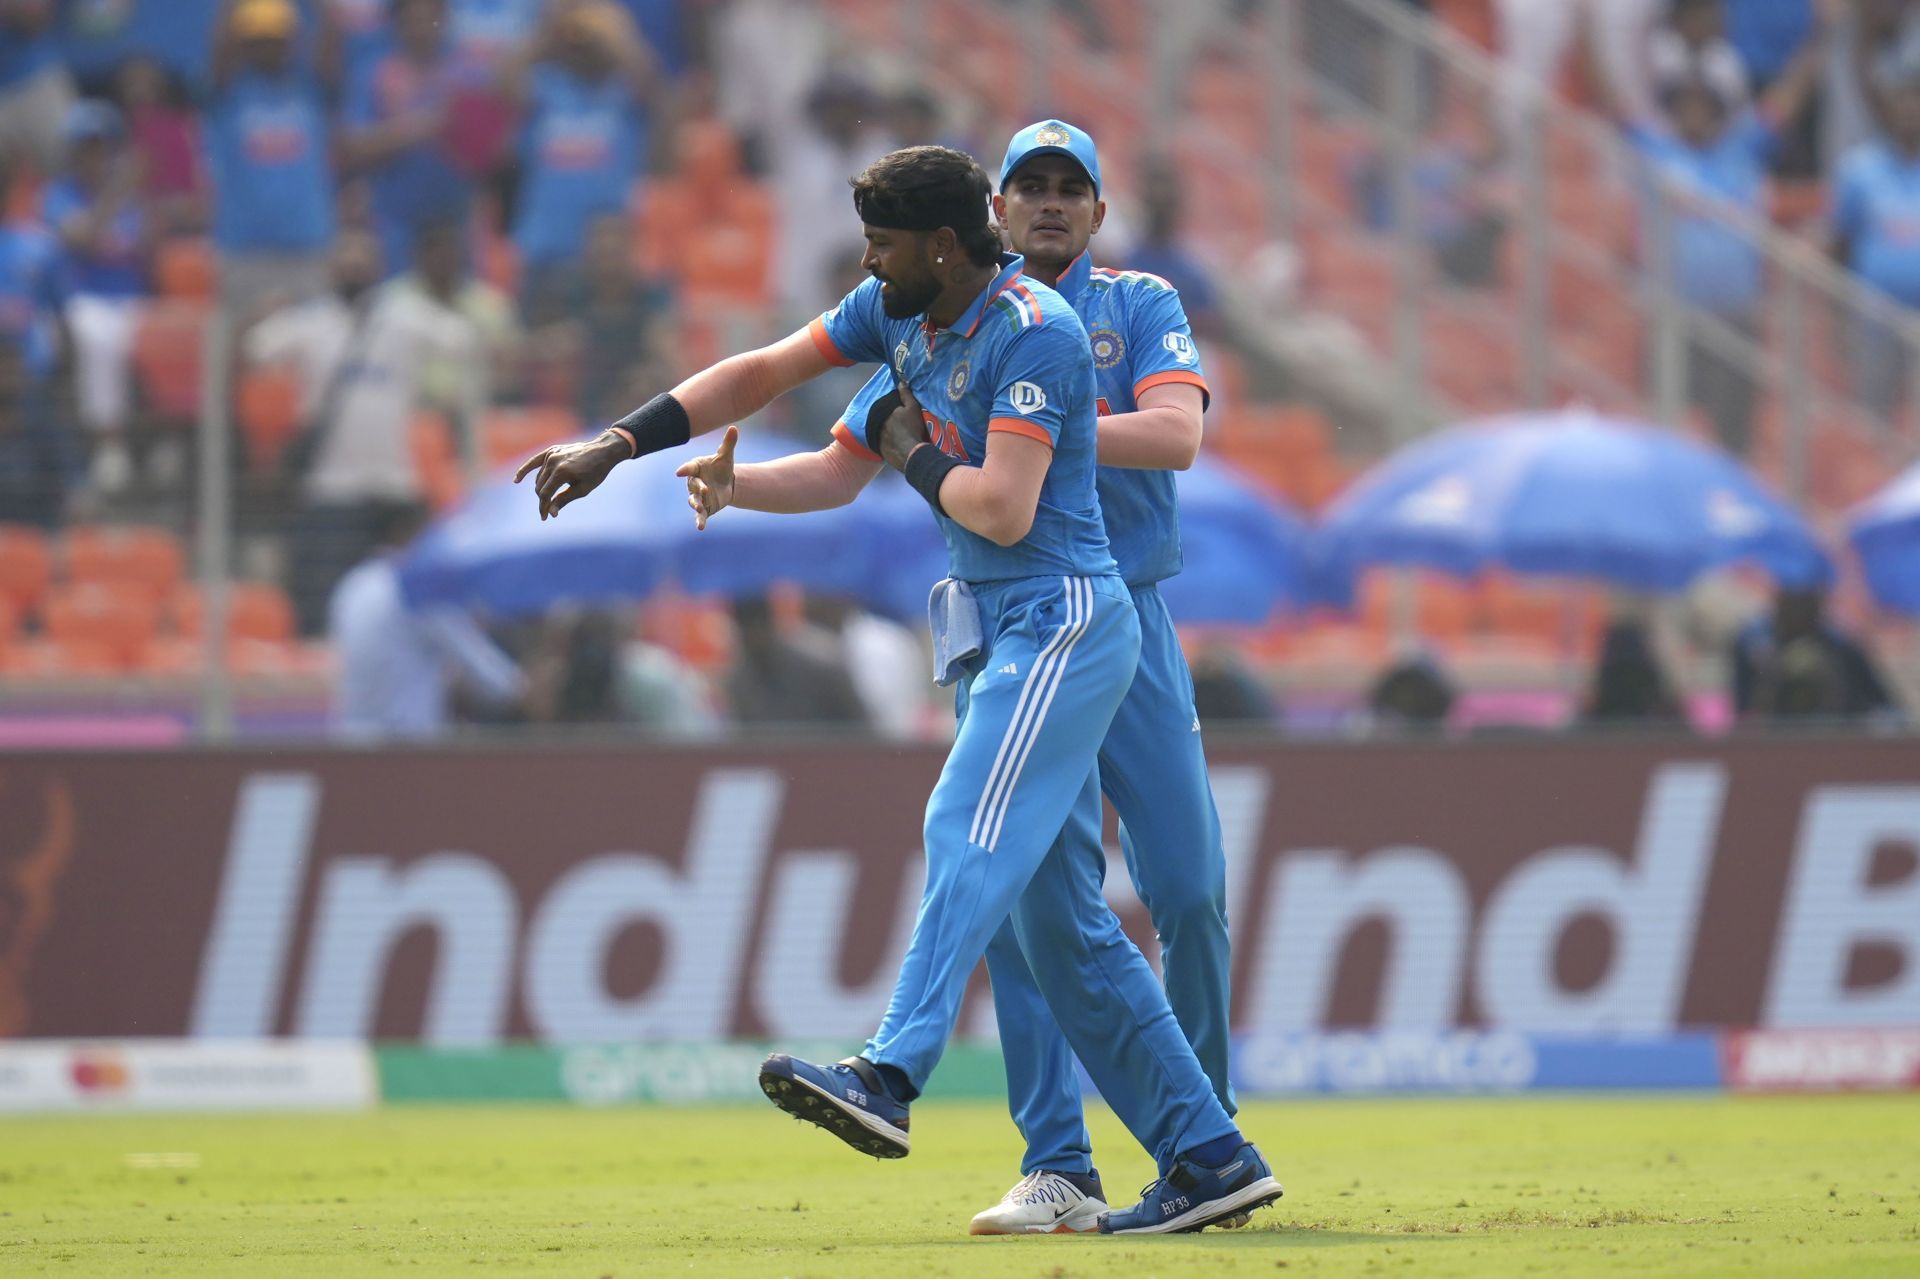 Hardik Pandya bagged two crucial wickets for India in their 2023 World Cup game against Pakistan.